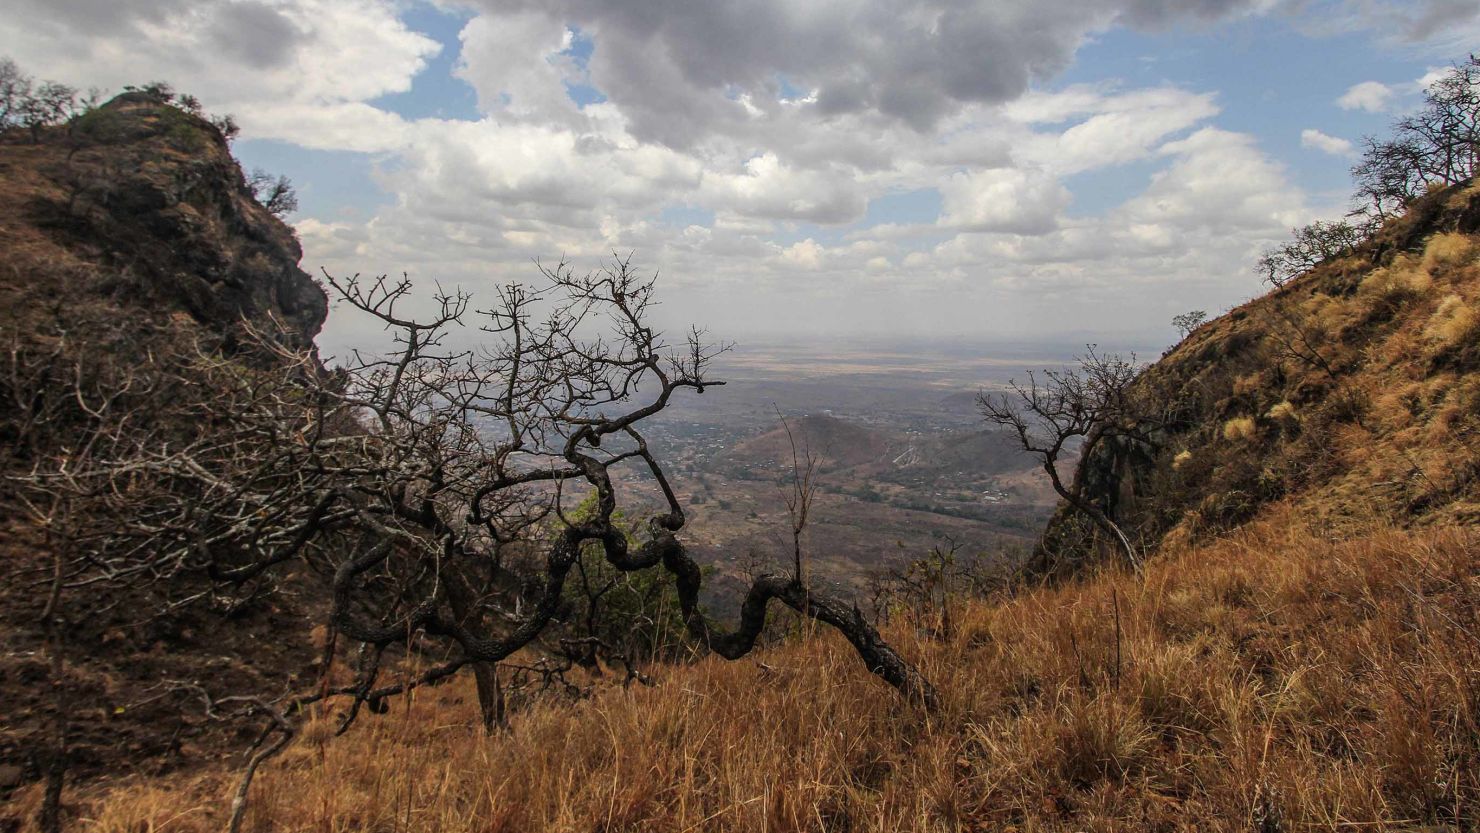 A view overlooking the landscape of Karamoja, Uganda, pictured in February 2017.